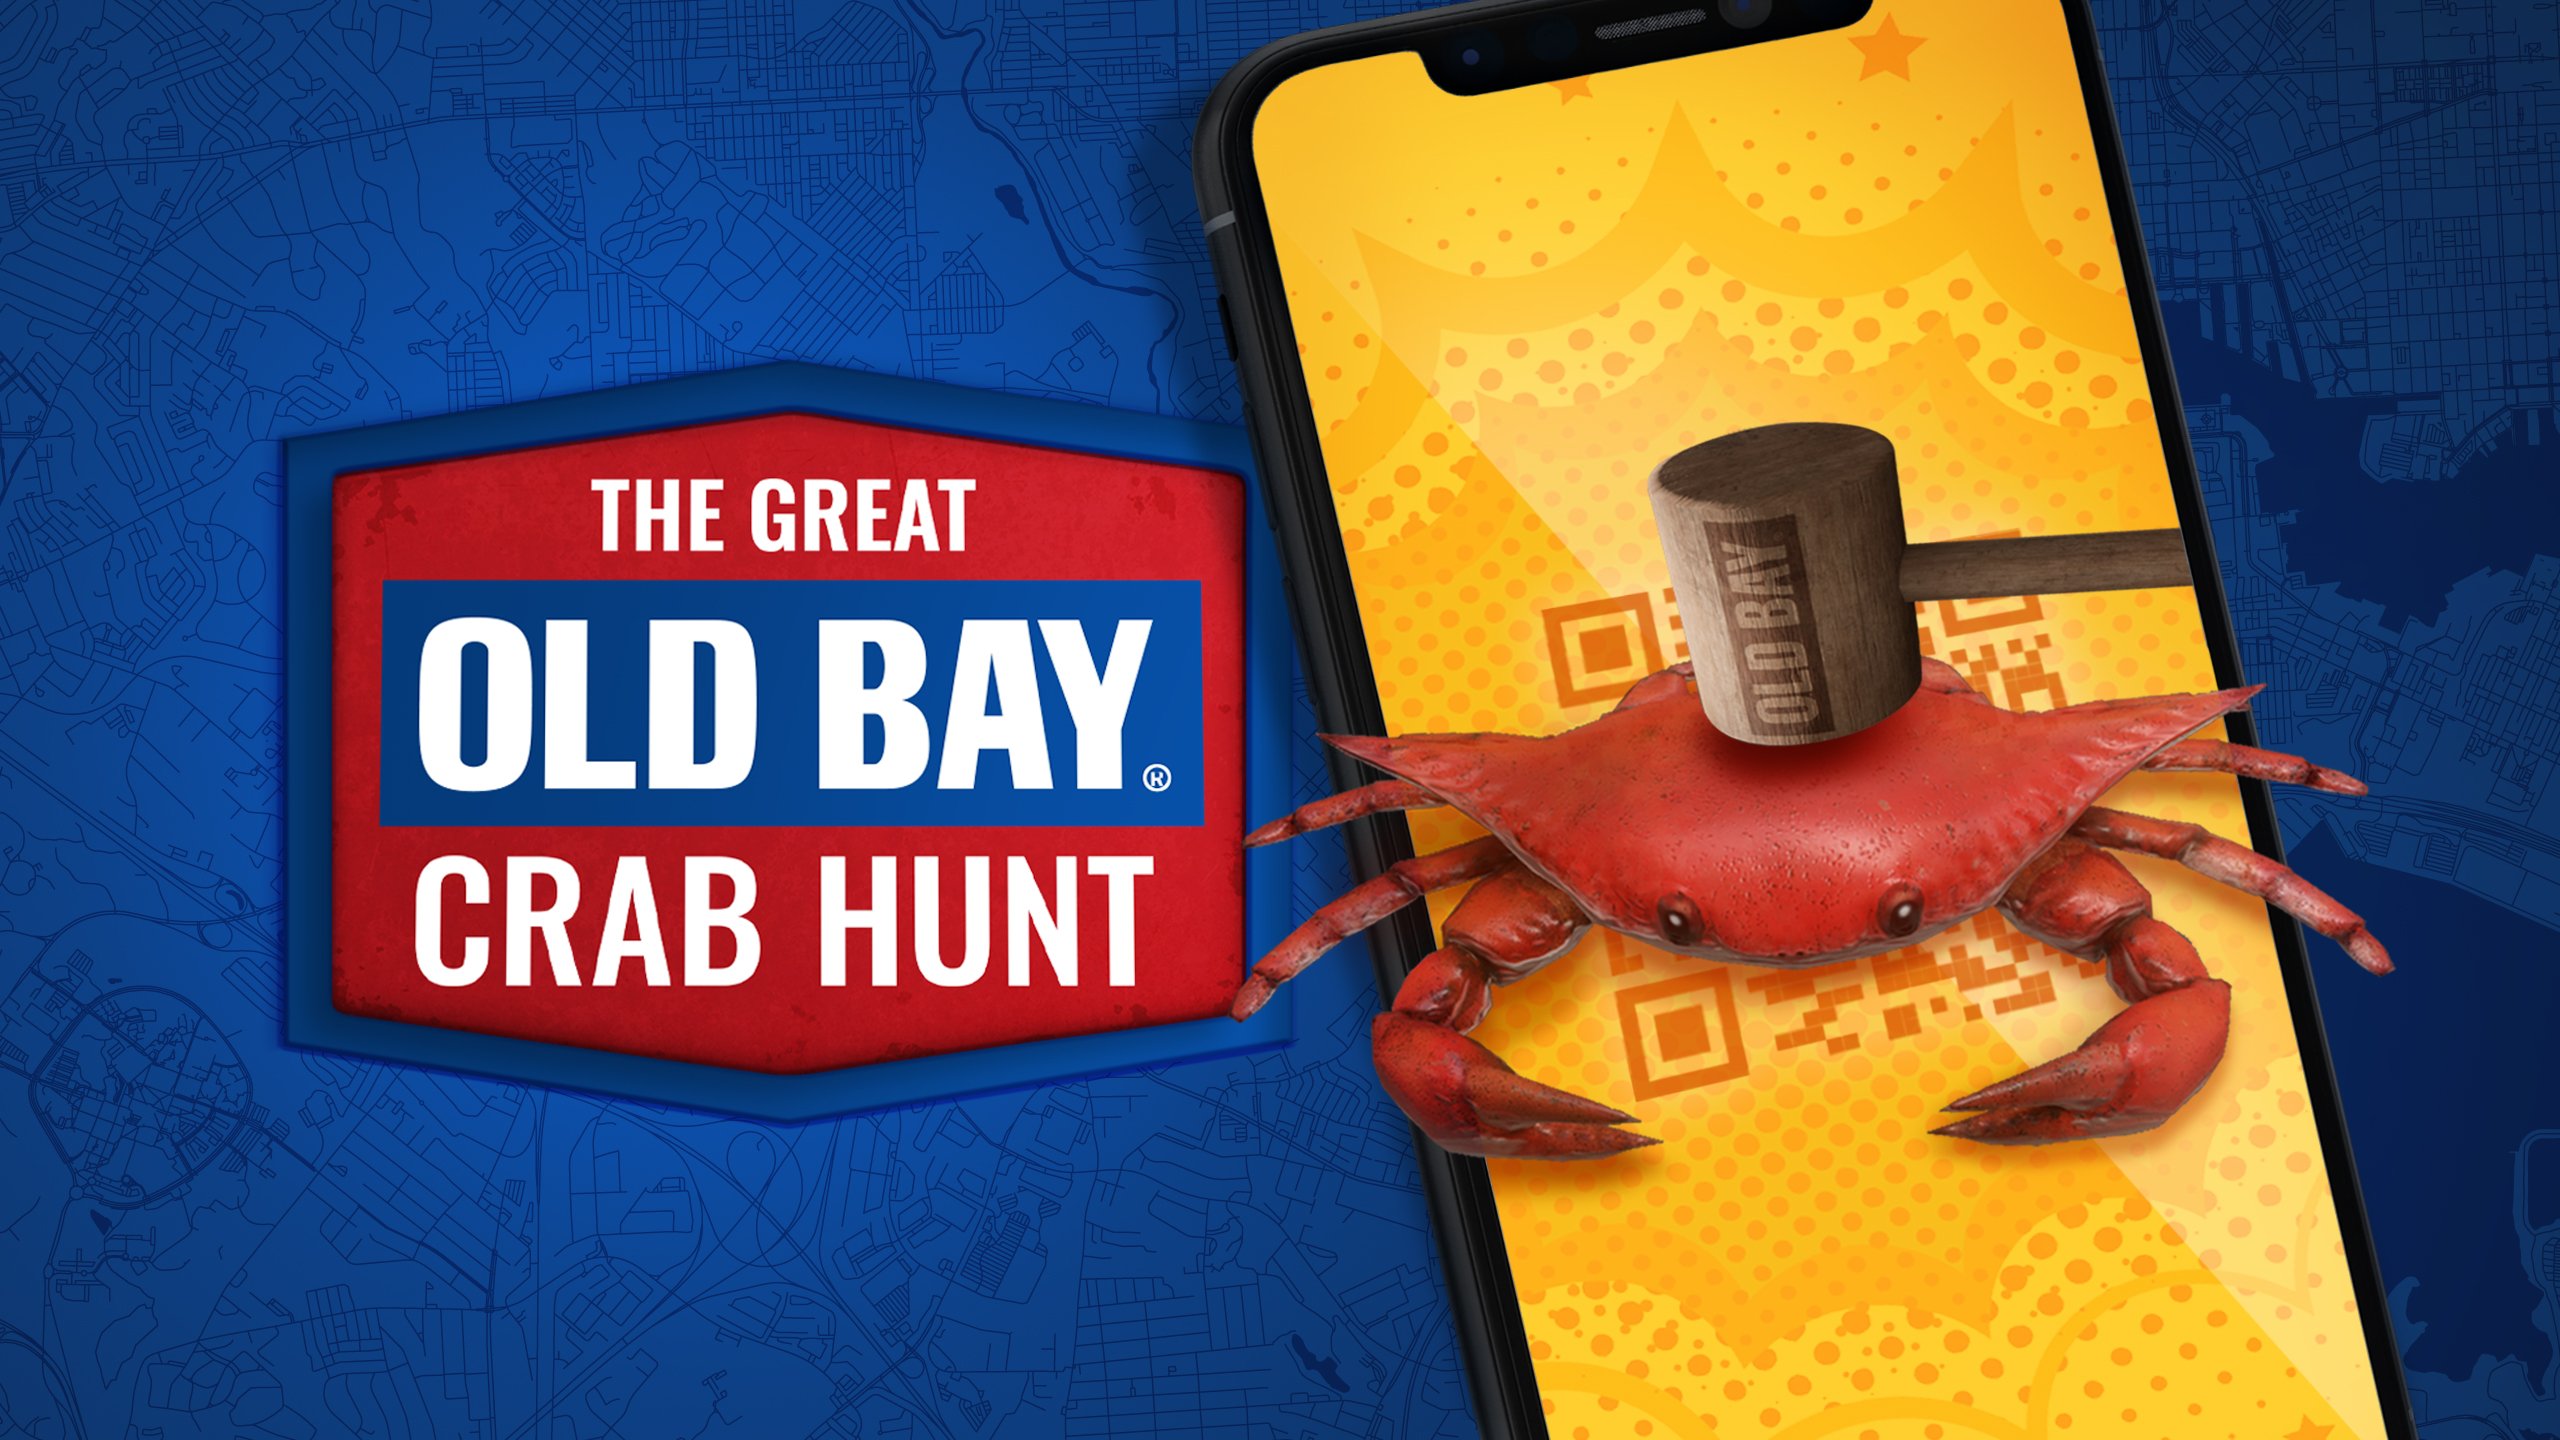 OLD BAY launches AR scavenger hunt in Baltimore to help reinvigorate the community